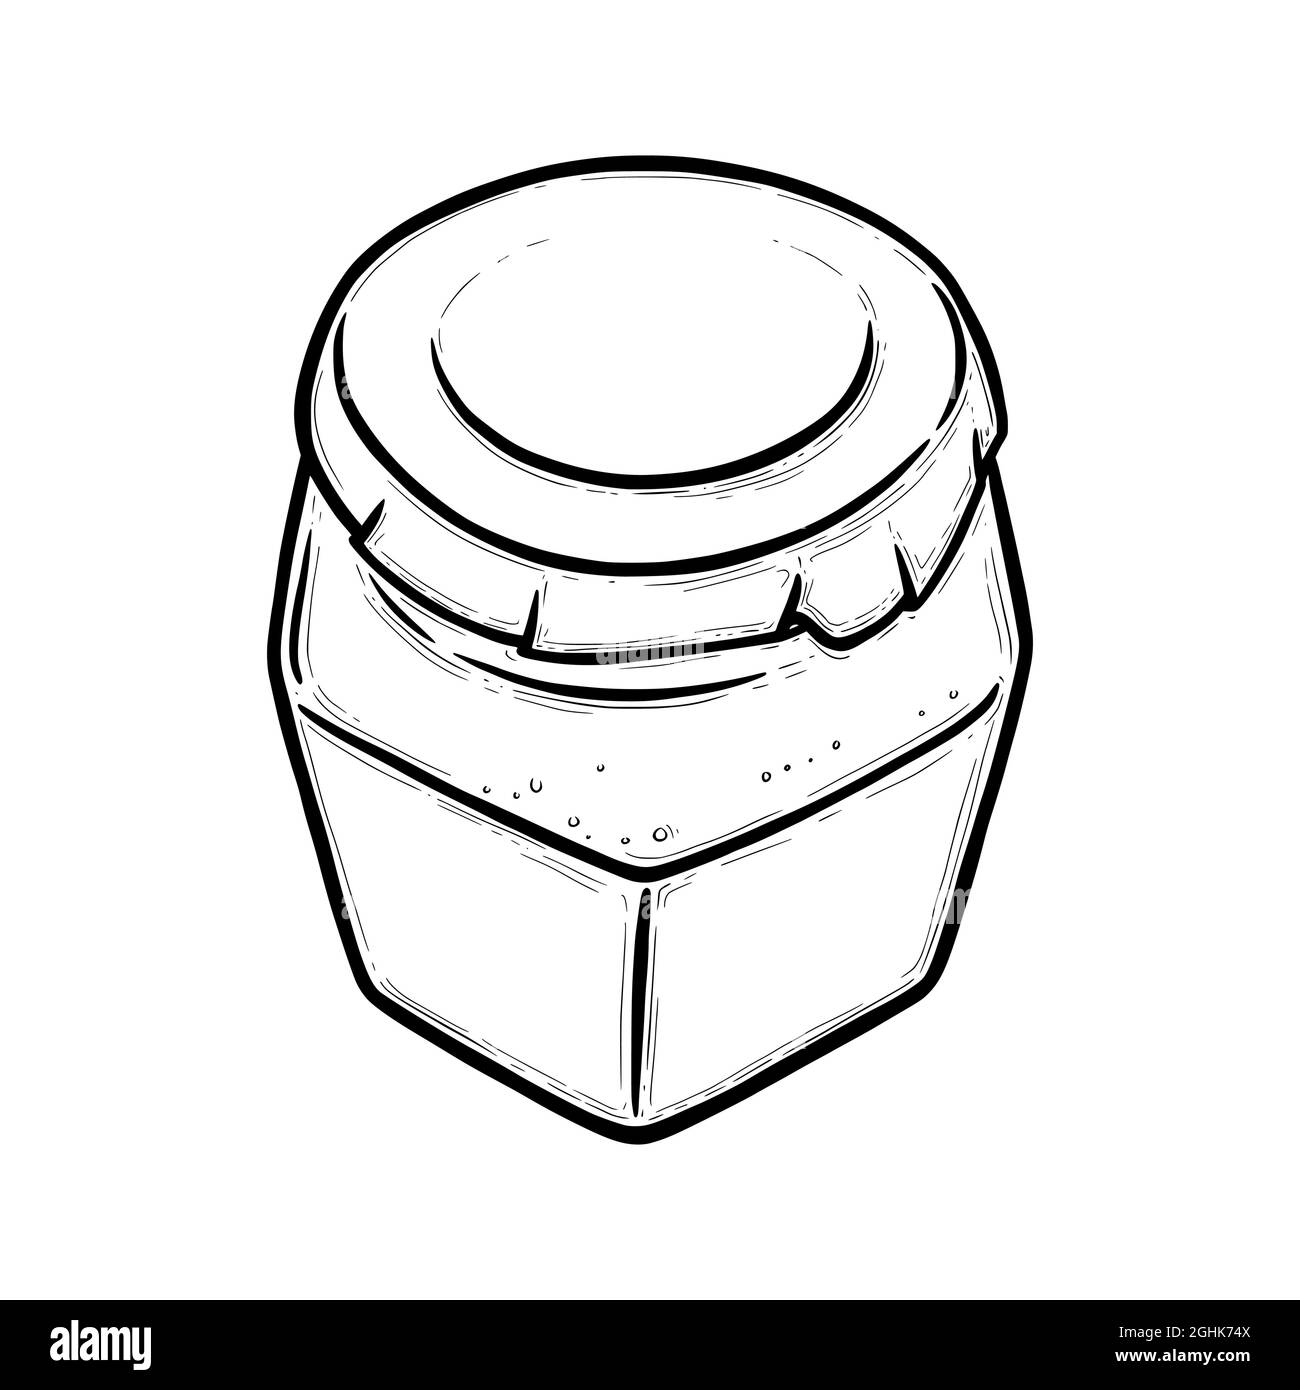 Glass jar sketch. Hexagonal empty jar for preserves of pickles, honey or jam. Hand drawn vector illustration isolated in white background Stock Vector